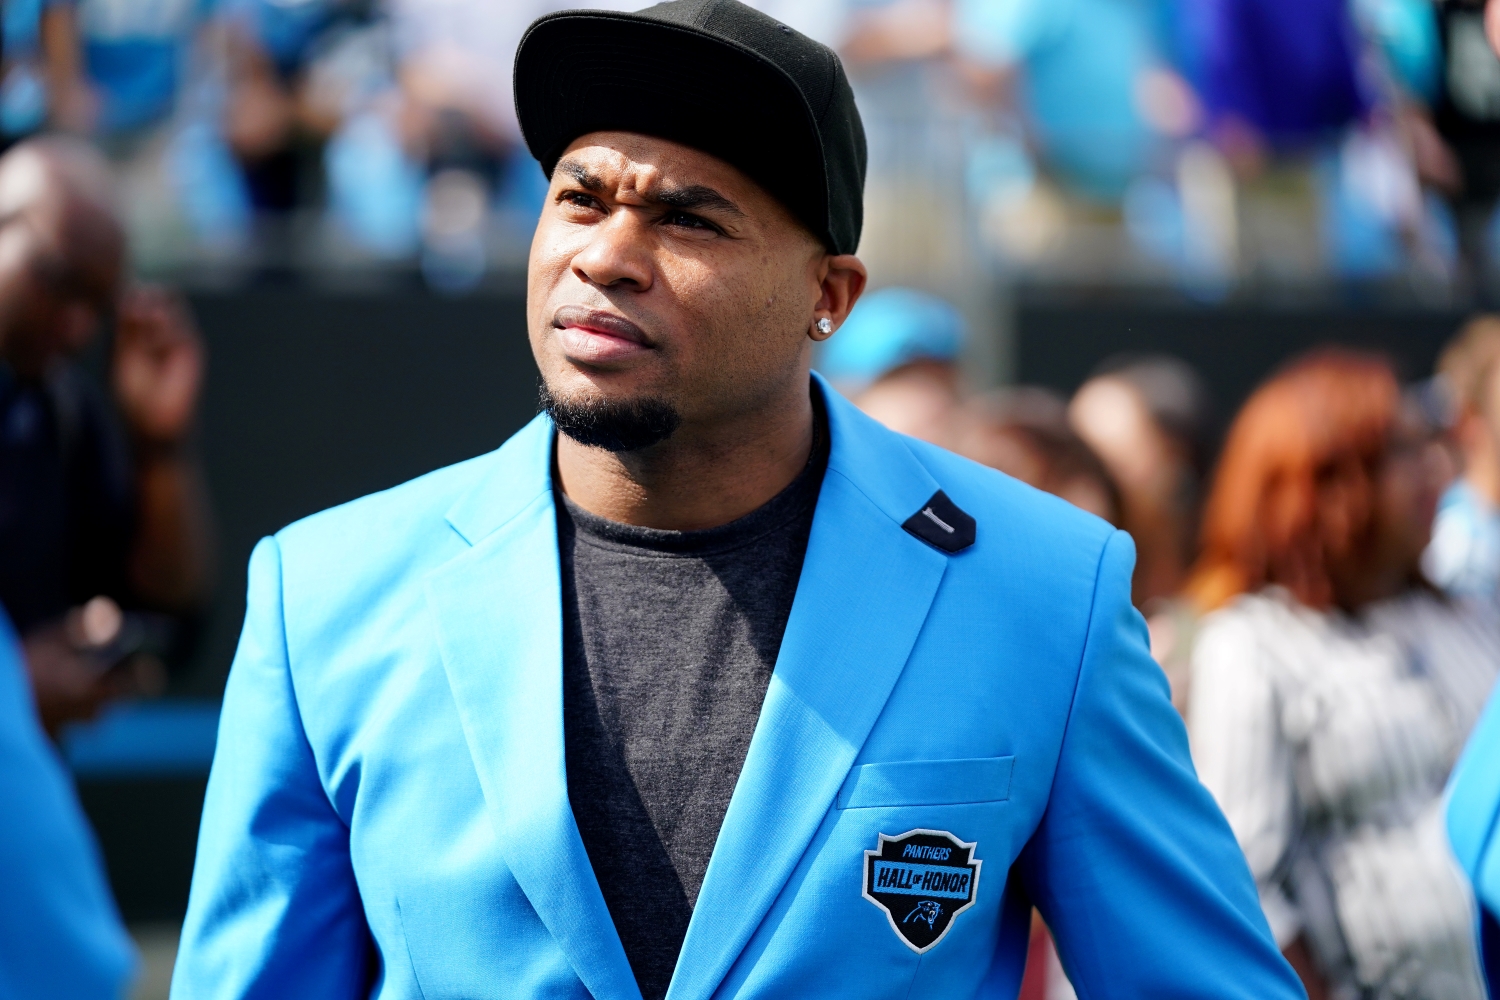 Former Carolina Panthers star Steve Smith looks on before a game against the Jacksonville Jaguars.